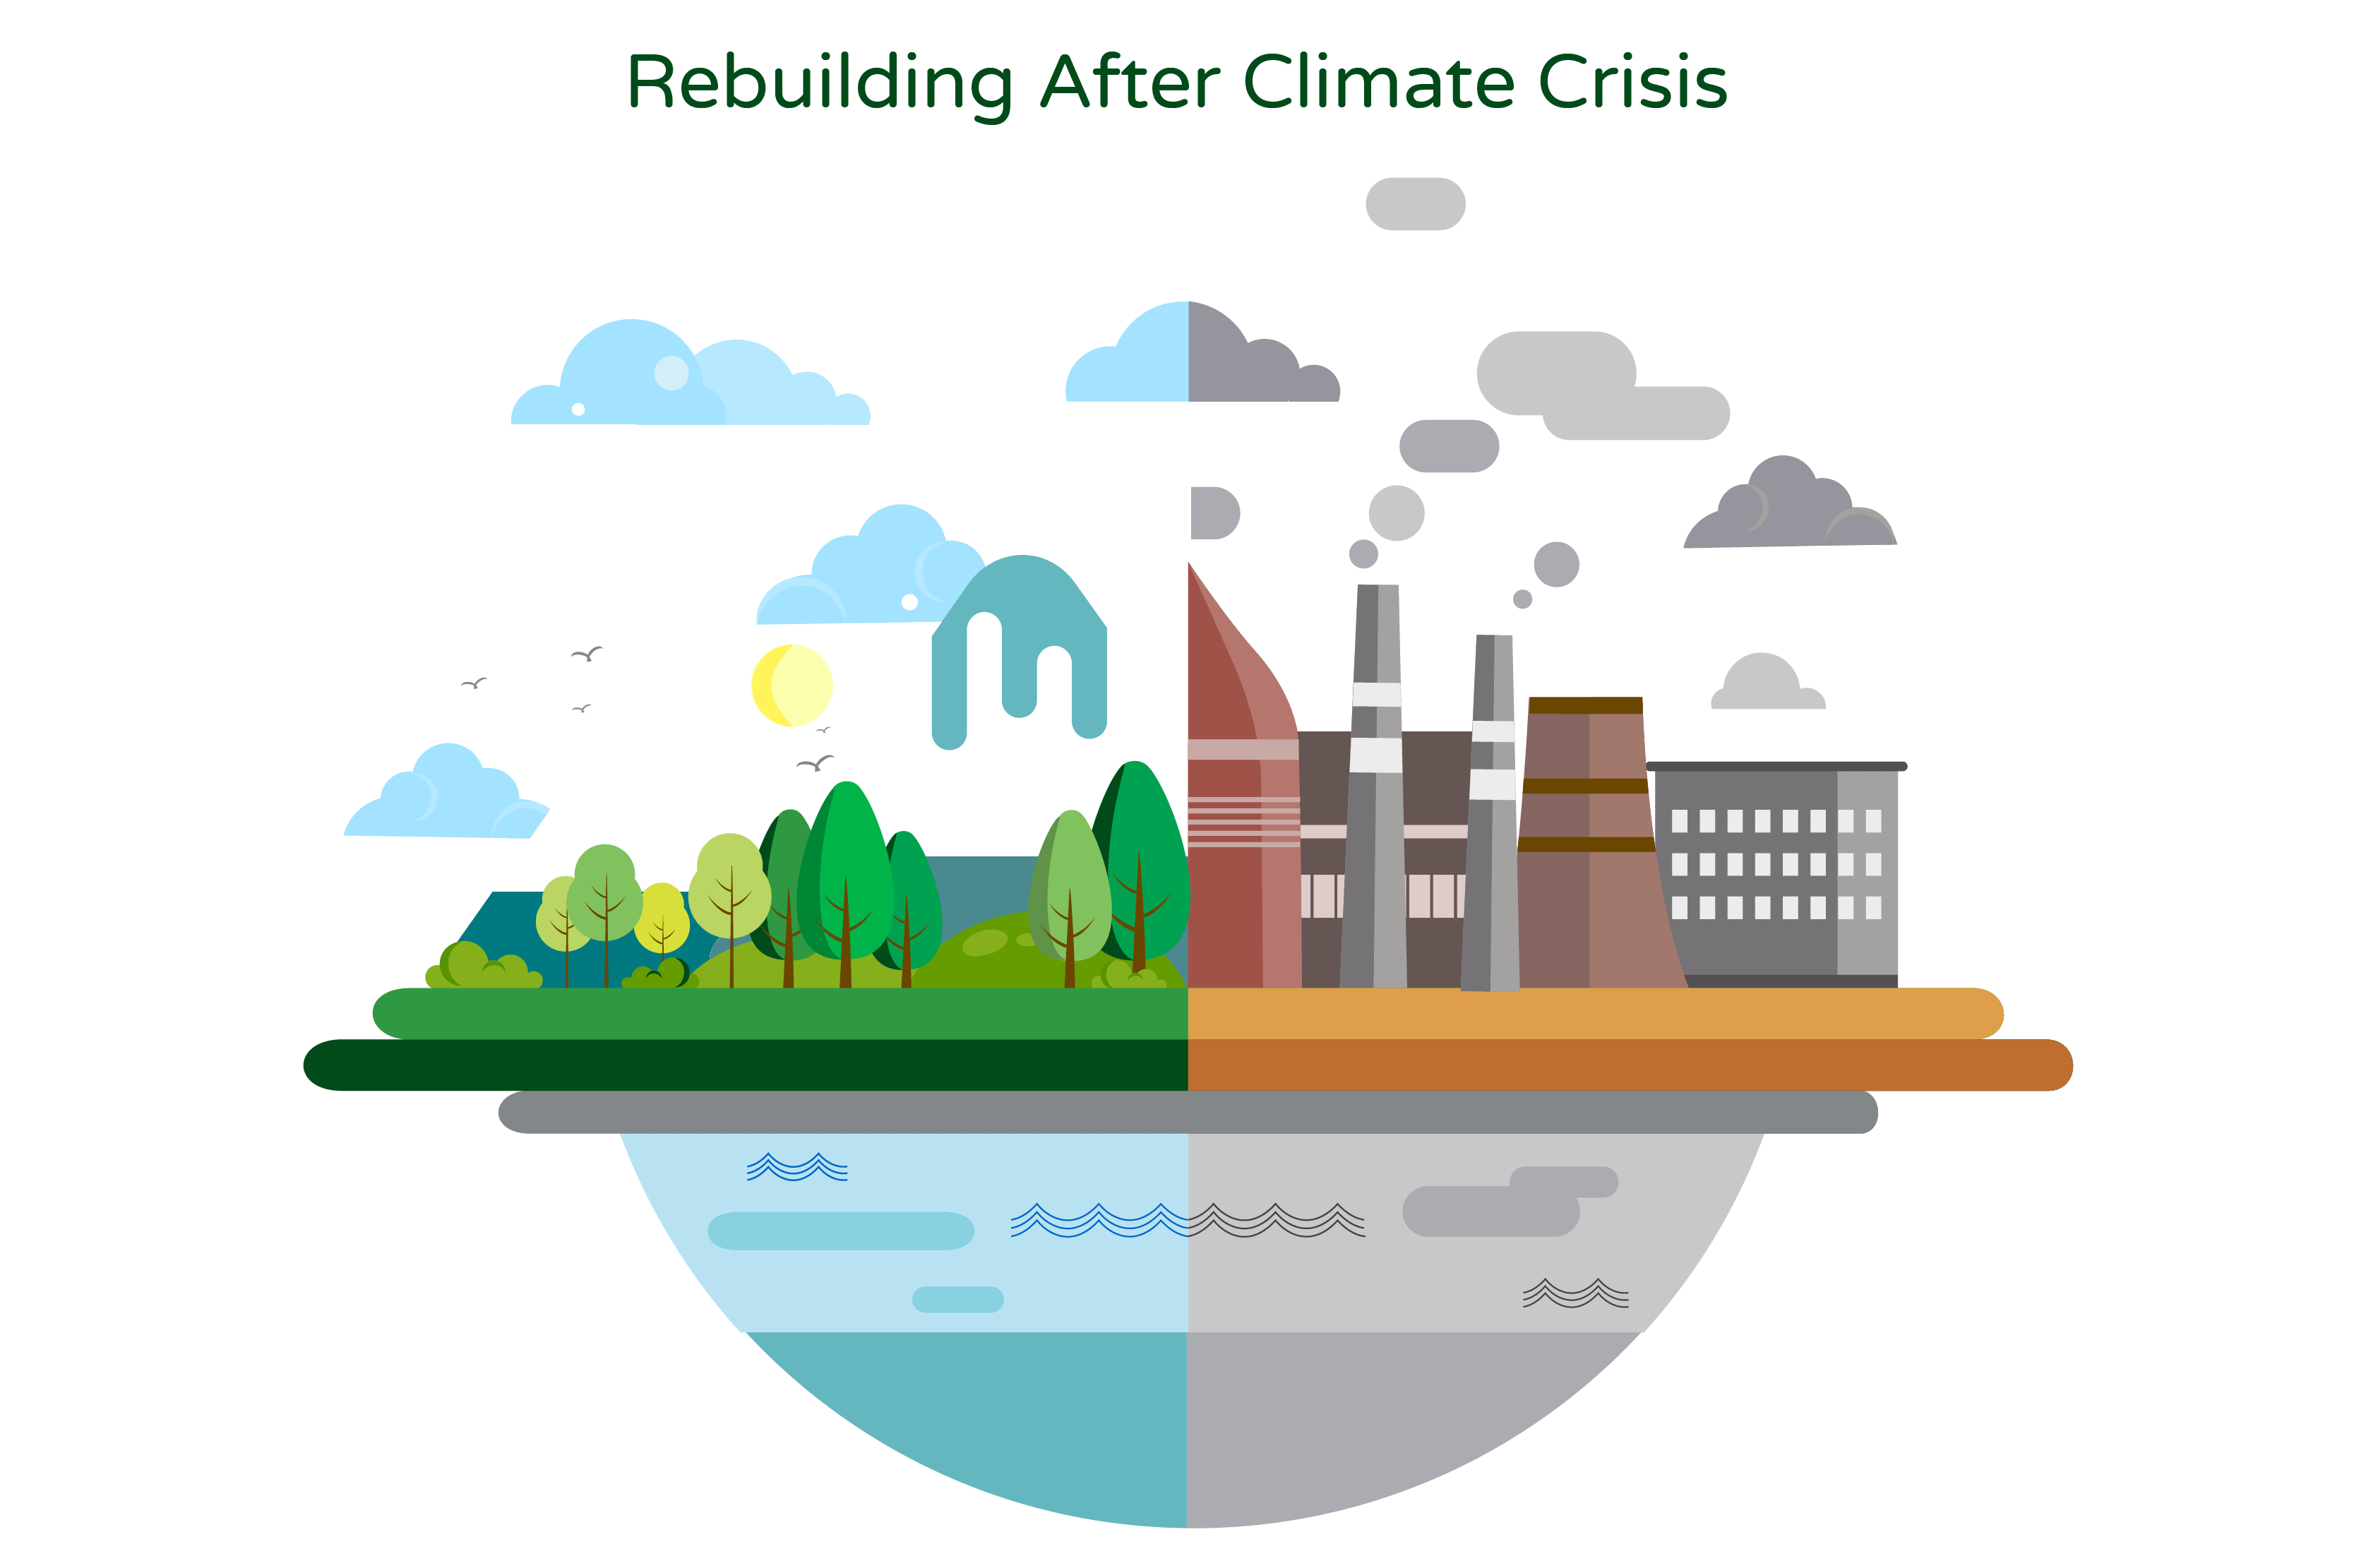 Illustration titled 'Rebuilding After Climate Crisis.' The illustration presents a half globe divided into two parts. The left side represents the negative impacts of climate change, showcasing its devastating effects such as extreme weather events, rising sea levels, and loss of biodiversity. The right side portrays the same region after recovery from the climate crisis. Various positive changes, such as increased funding, sustainable practices, and adaptation measures, are depicted, symbolizing the efforts taken to mitigate and rebuild in the aftermath of climate change.